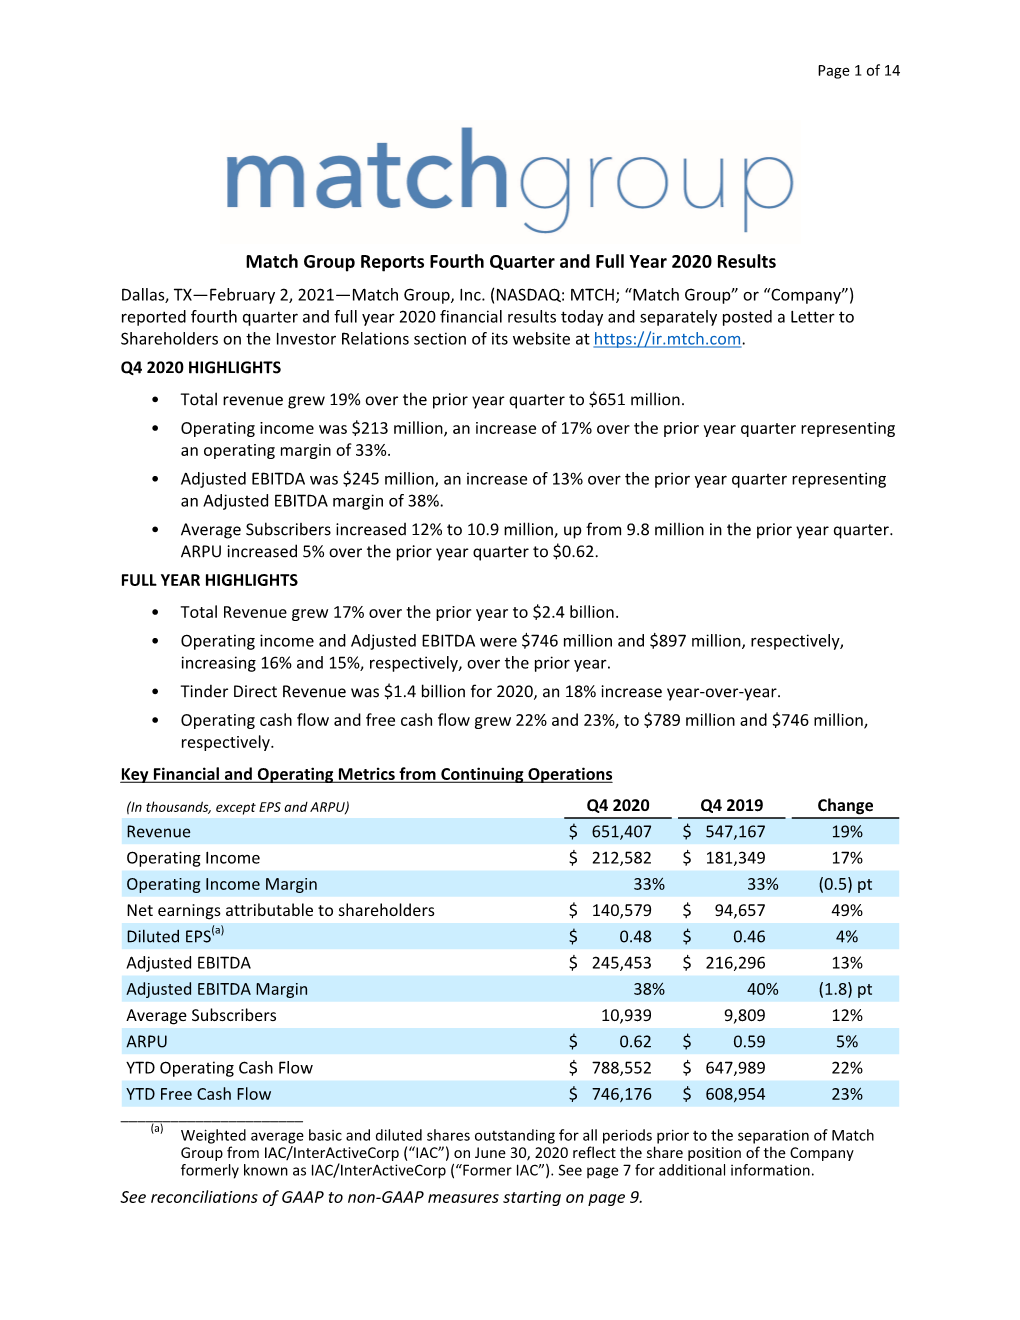 Match Group Reports Fourth Quarter and Full Year 2020 Results Dallas, TX—February 2, 2021—Match Group, Inc